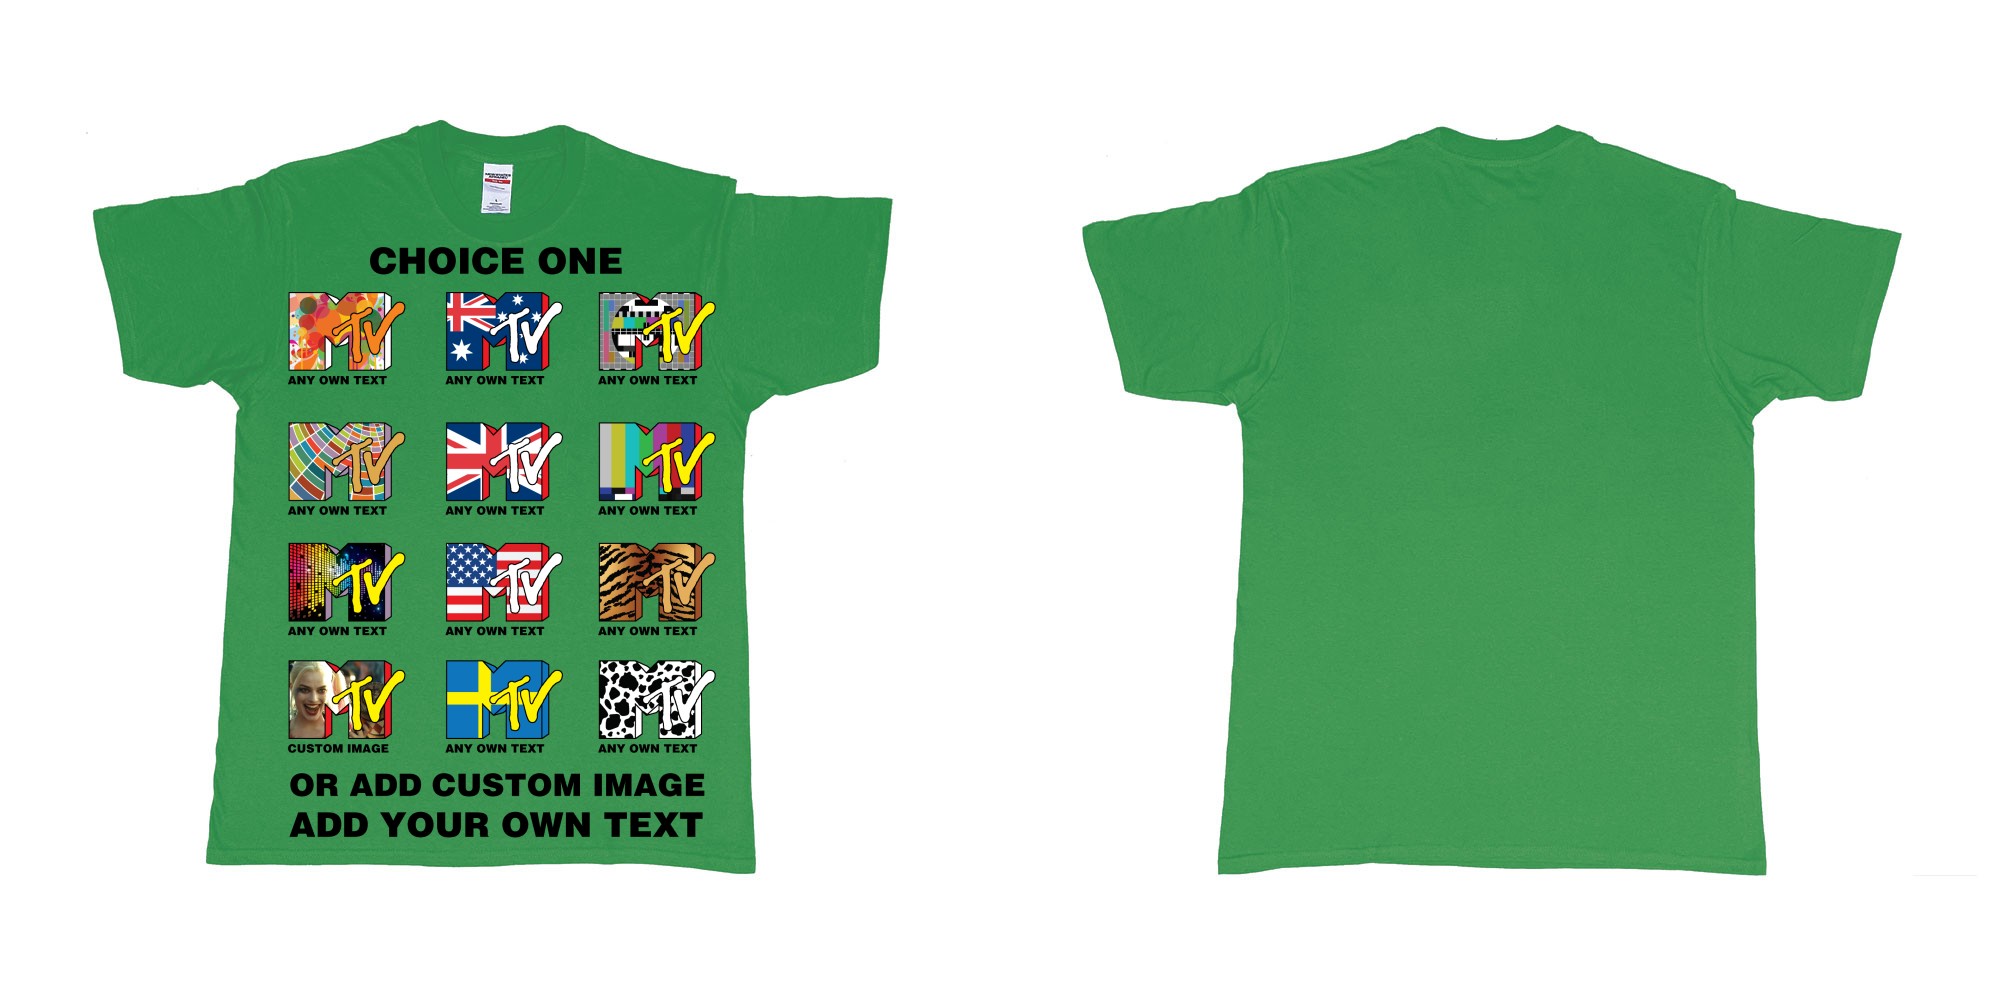 Custom tshirt design mtv logo choice any background text print in fabric color irish-green choice your own text made in Bali by The Pirate Way